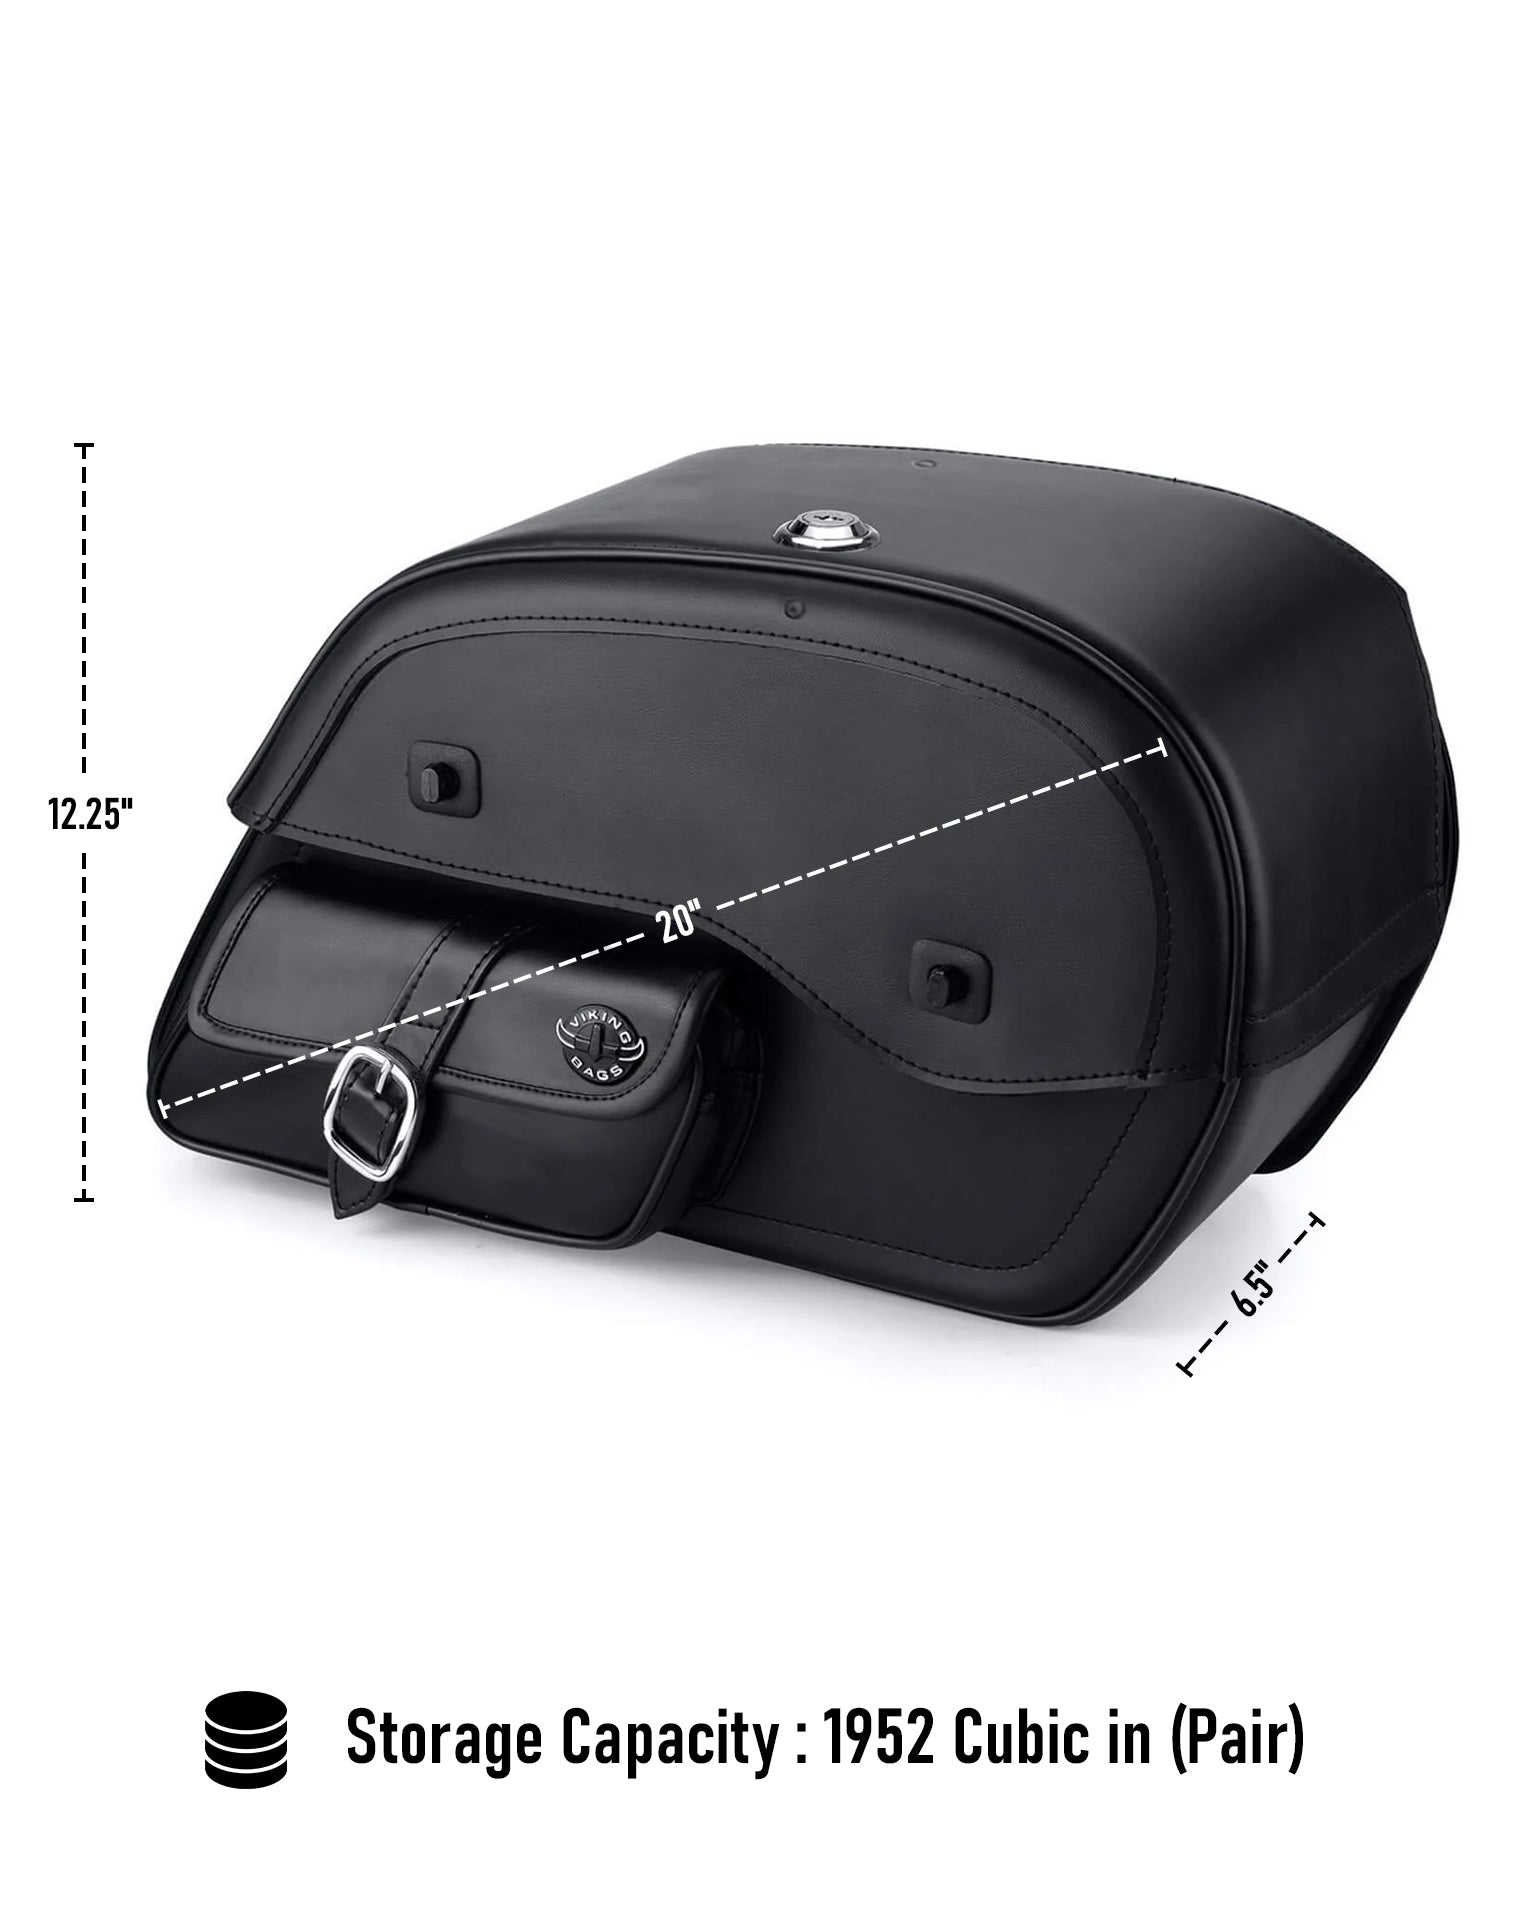 Viking Essential Side Pocket Large Leather Motorcycle Saddlebags For Harley Softail Street Bob Fxbb Can Store Your Ridings Gears